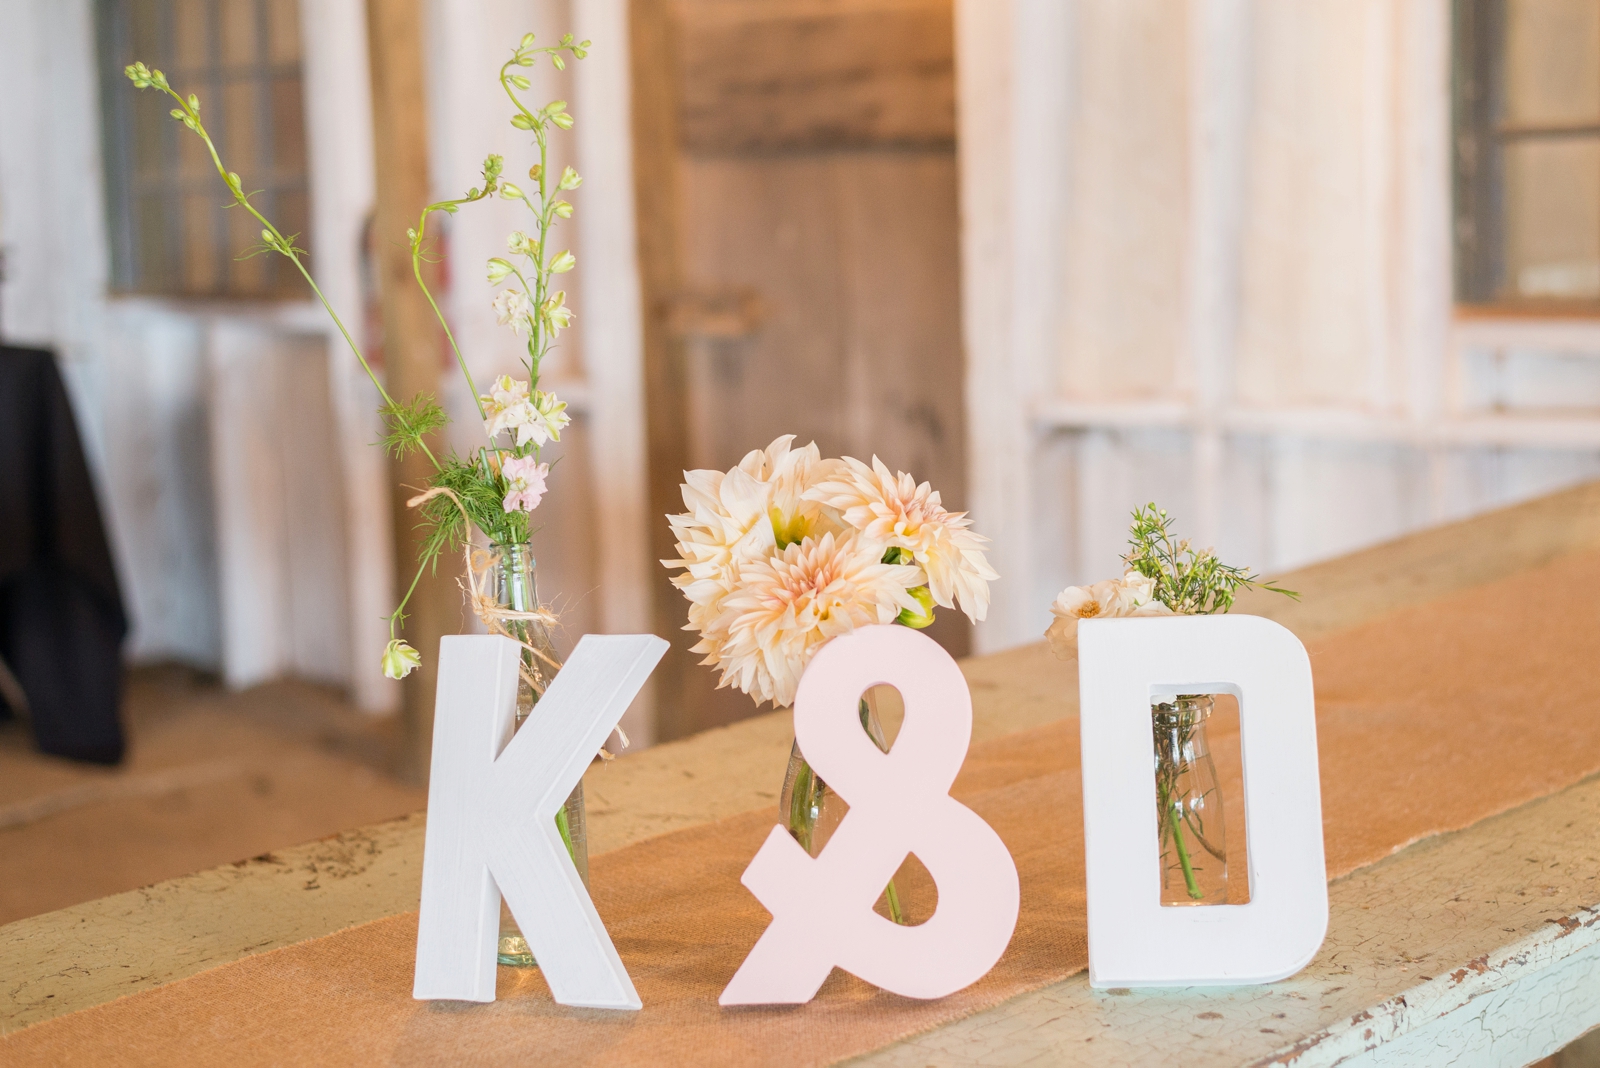 wedding-decoration-of-couples-initials-made-of-wood